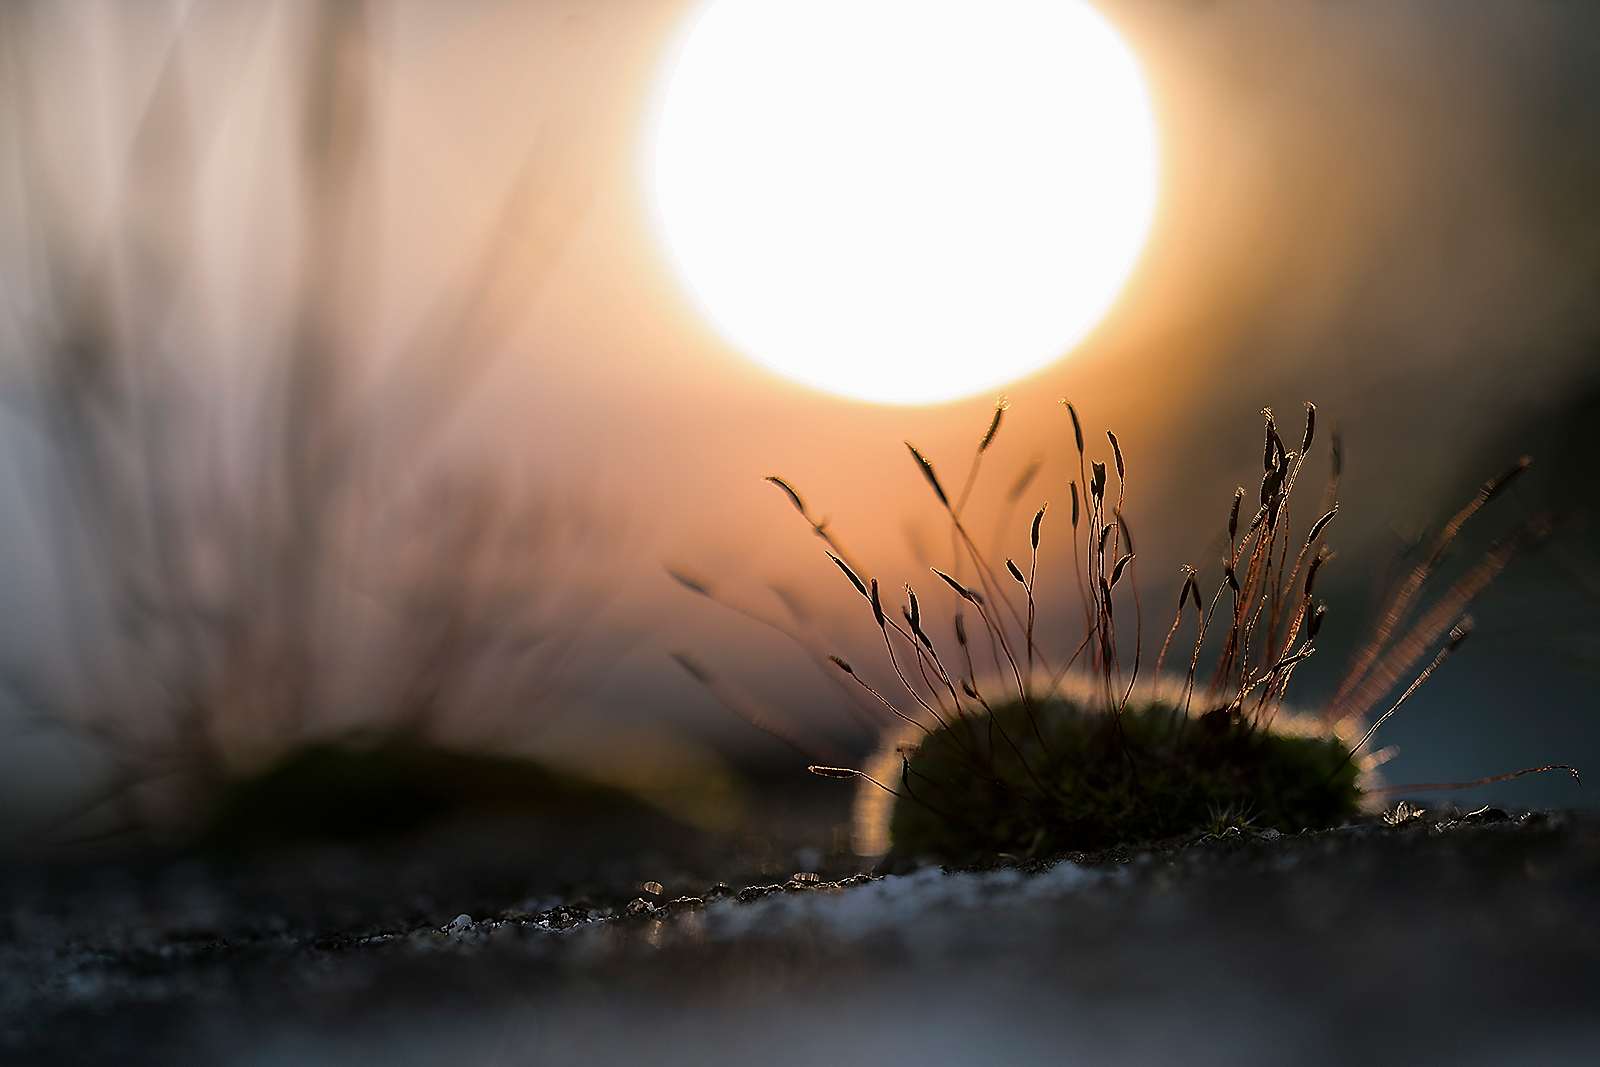 Close-up macro photograph of Tortula muralis moss, commonly known as wall-screw moss, with hair-pointed spikes well seen. The burning sun is visible in the background, while it sets, casting a light orange glow across the sky. Another patch of moss is seen in the background bokeh.